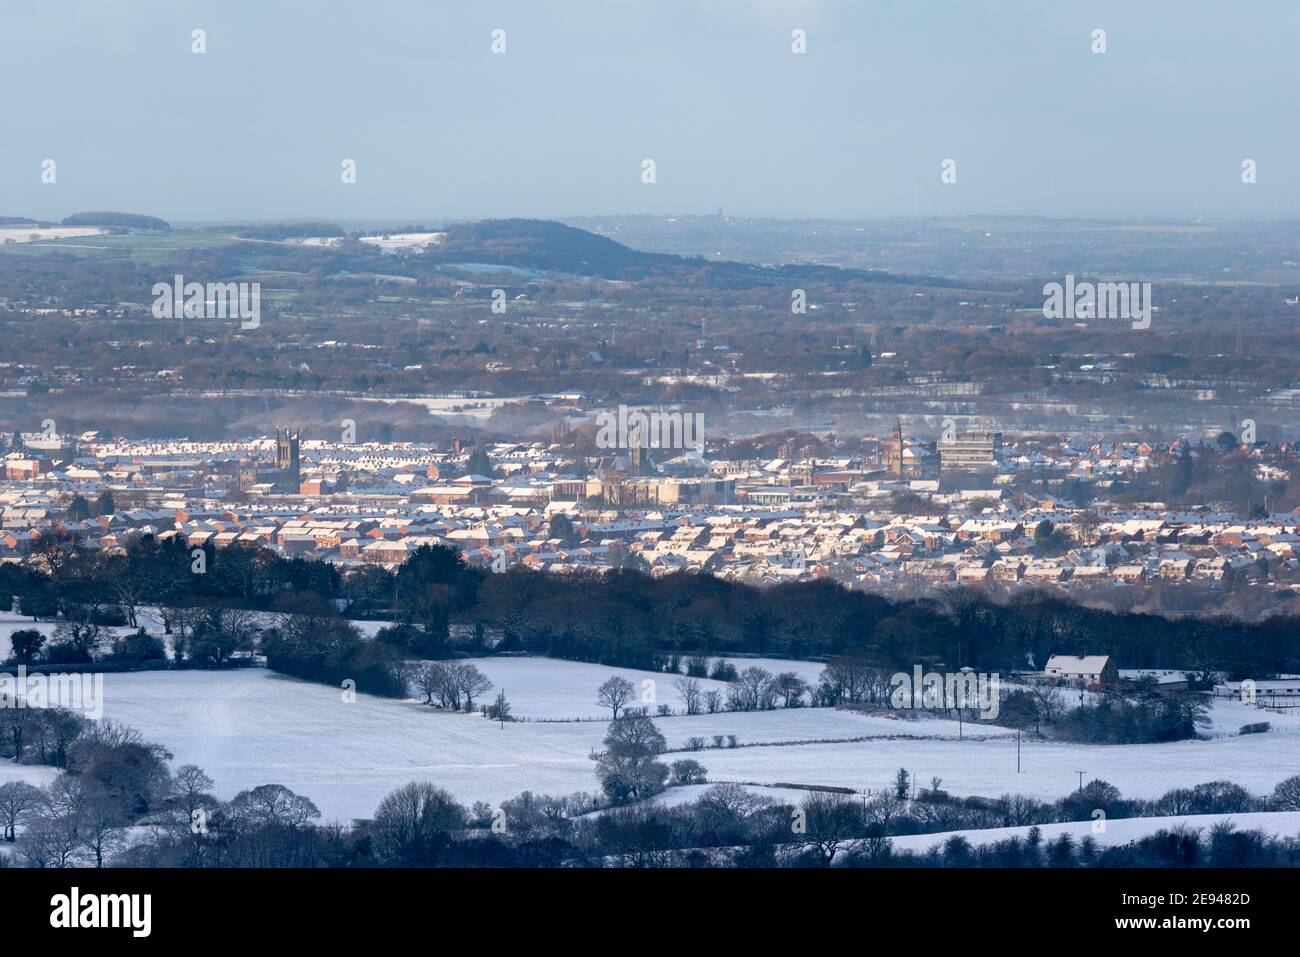 The bustling market town of Chorley seen from high on the surrounding moorland. Stock Photo